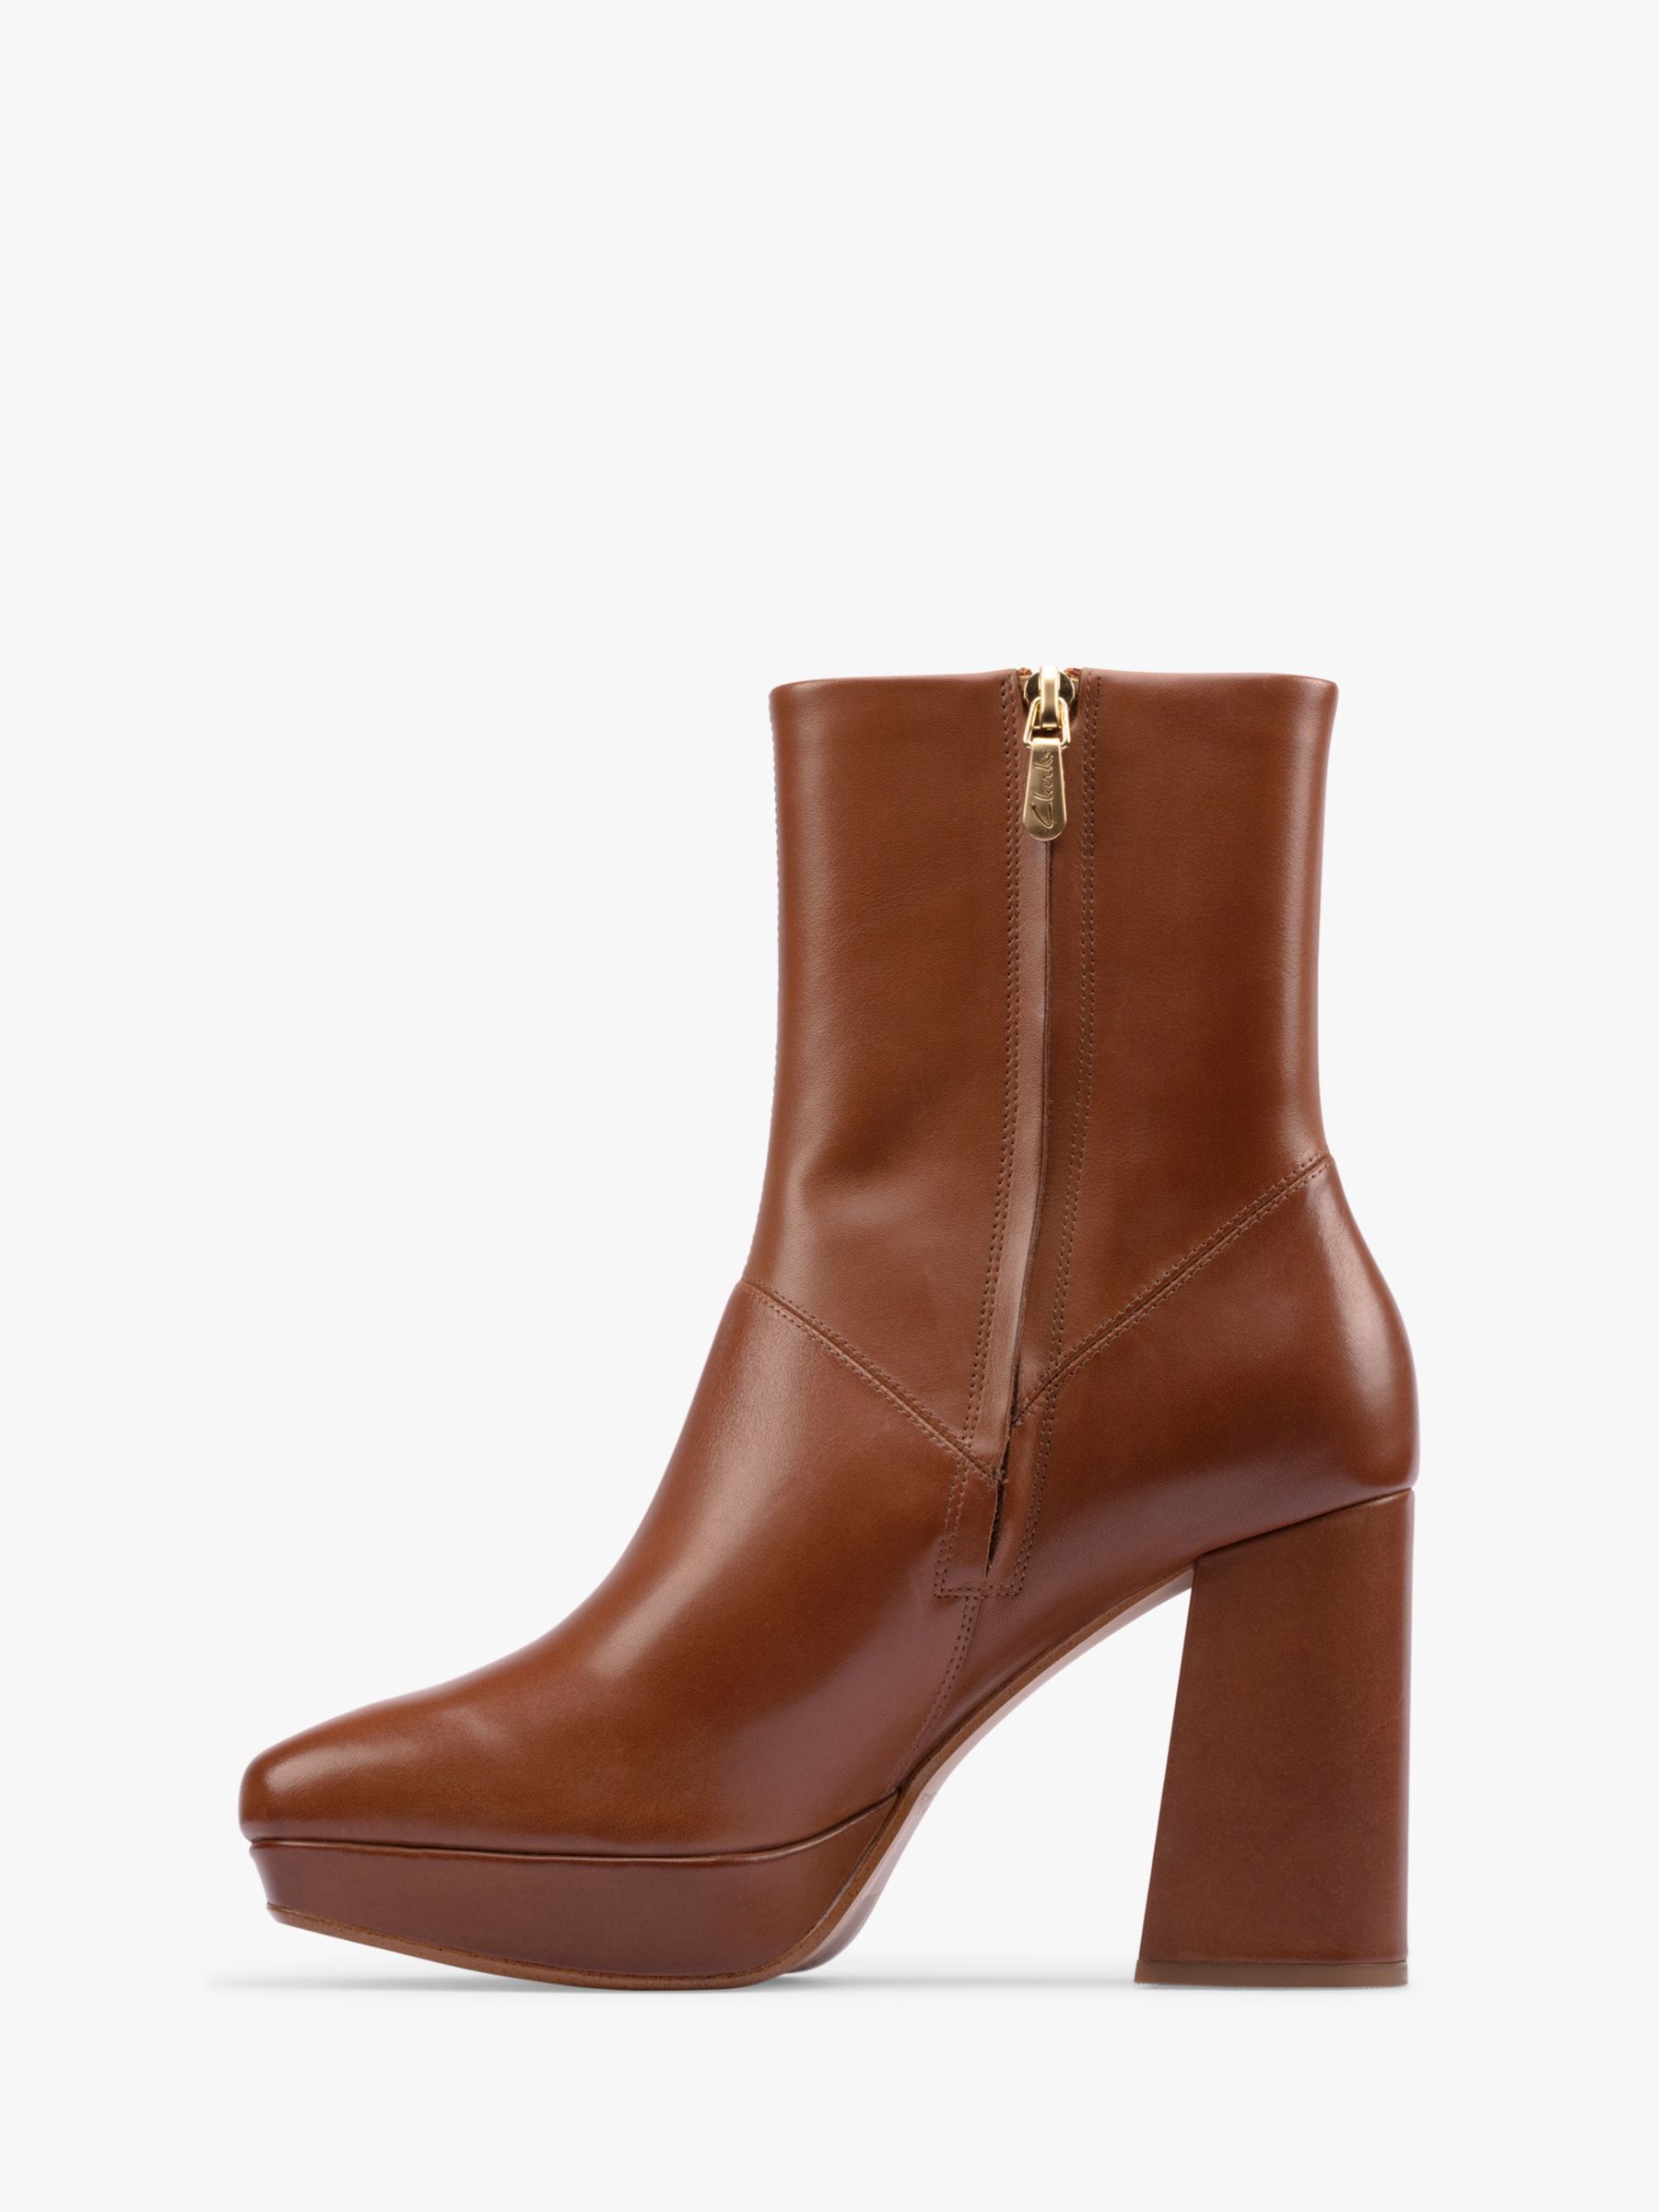 clarks high ankle boots